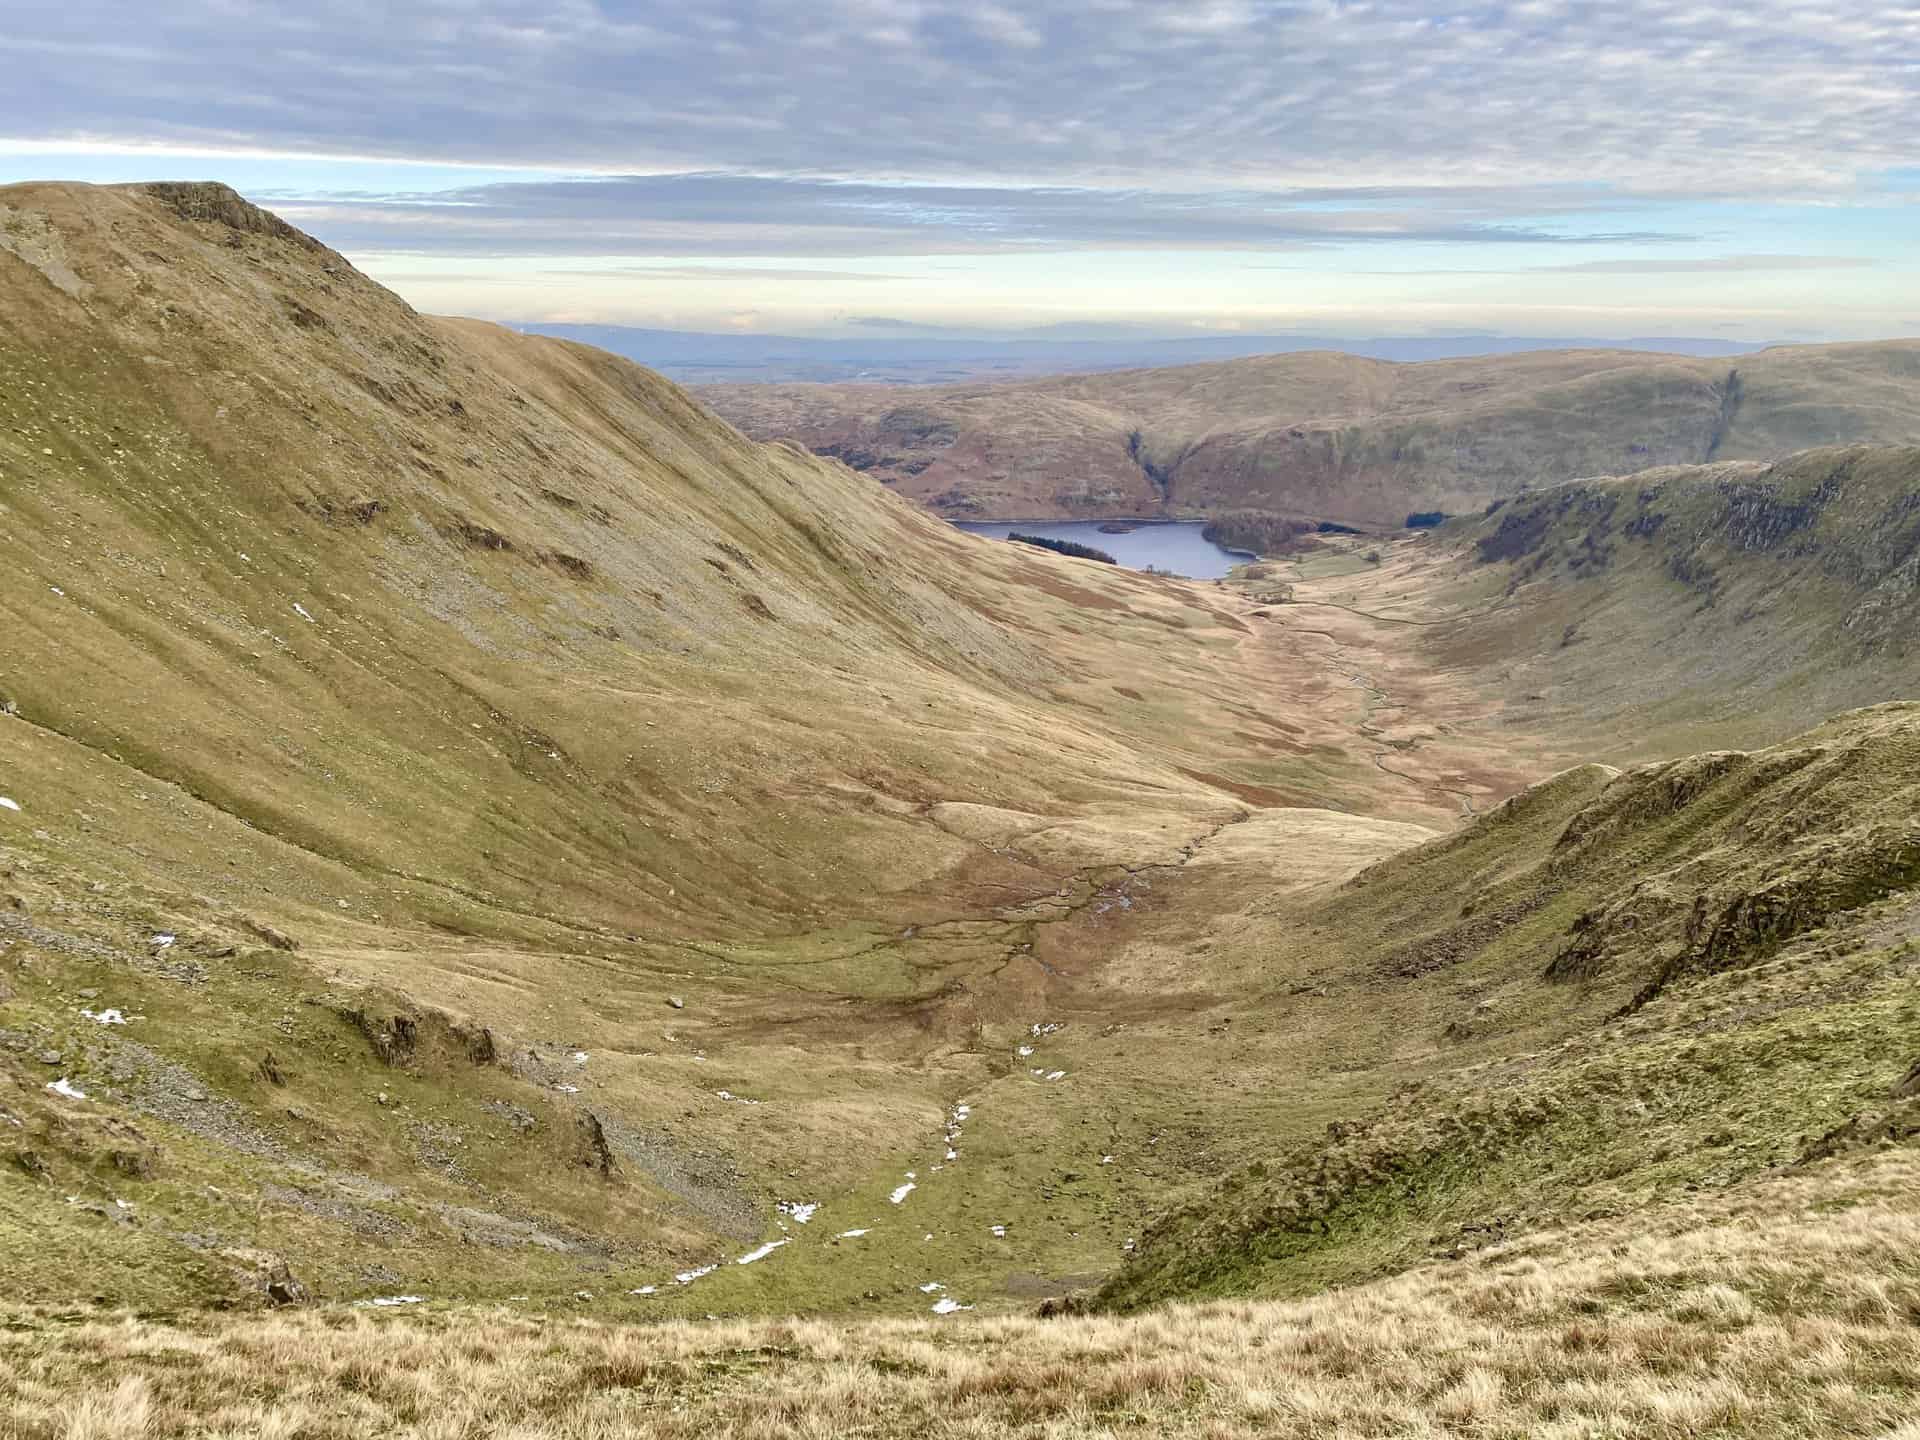 The U-shaped glacial valley which separates Kidsty Pike and Rough Crag. Short Stile protrudes into the valley and Riggindale Beck flows through it on its way to Haweswater Reservoir.